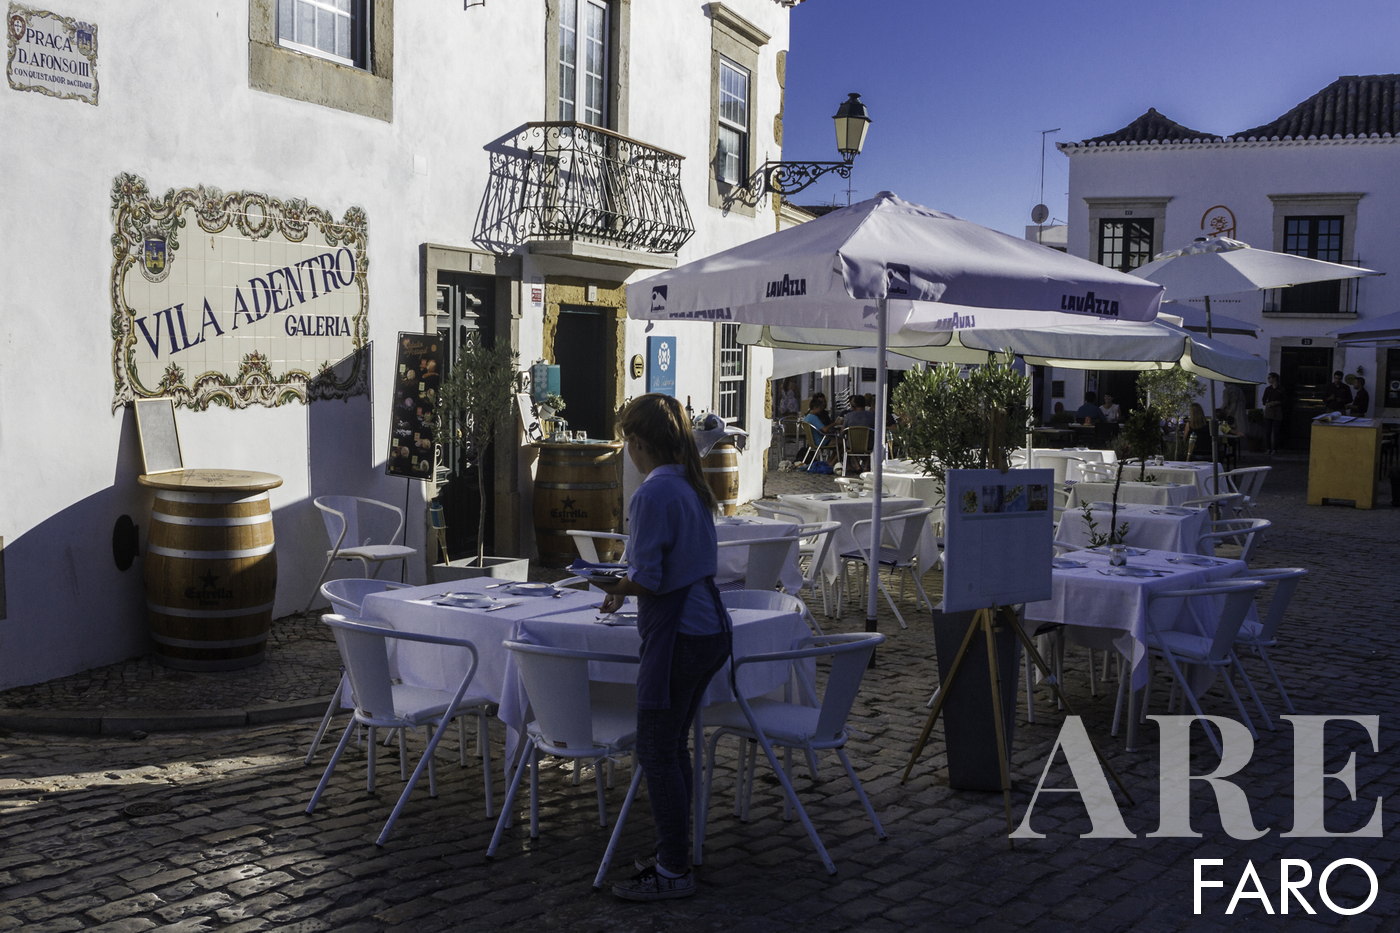 Restaurants inside the walls of the old town of Faro